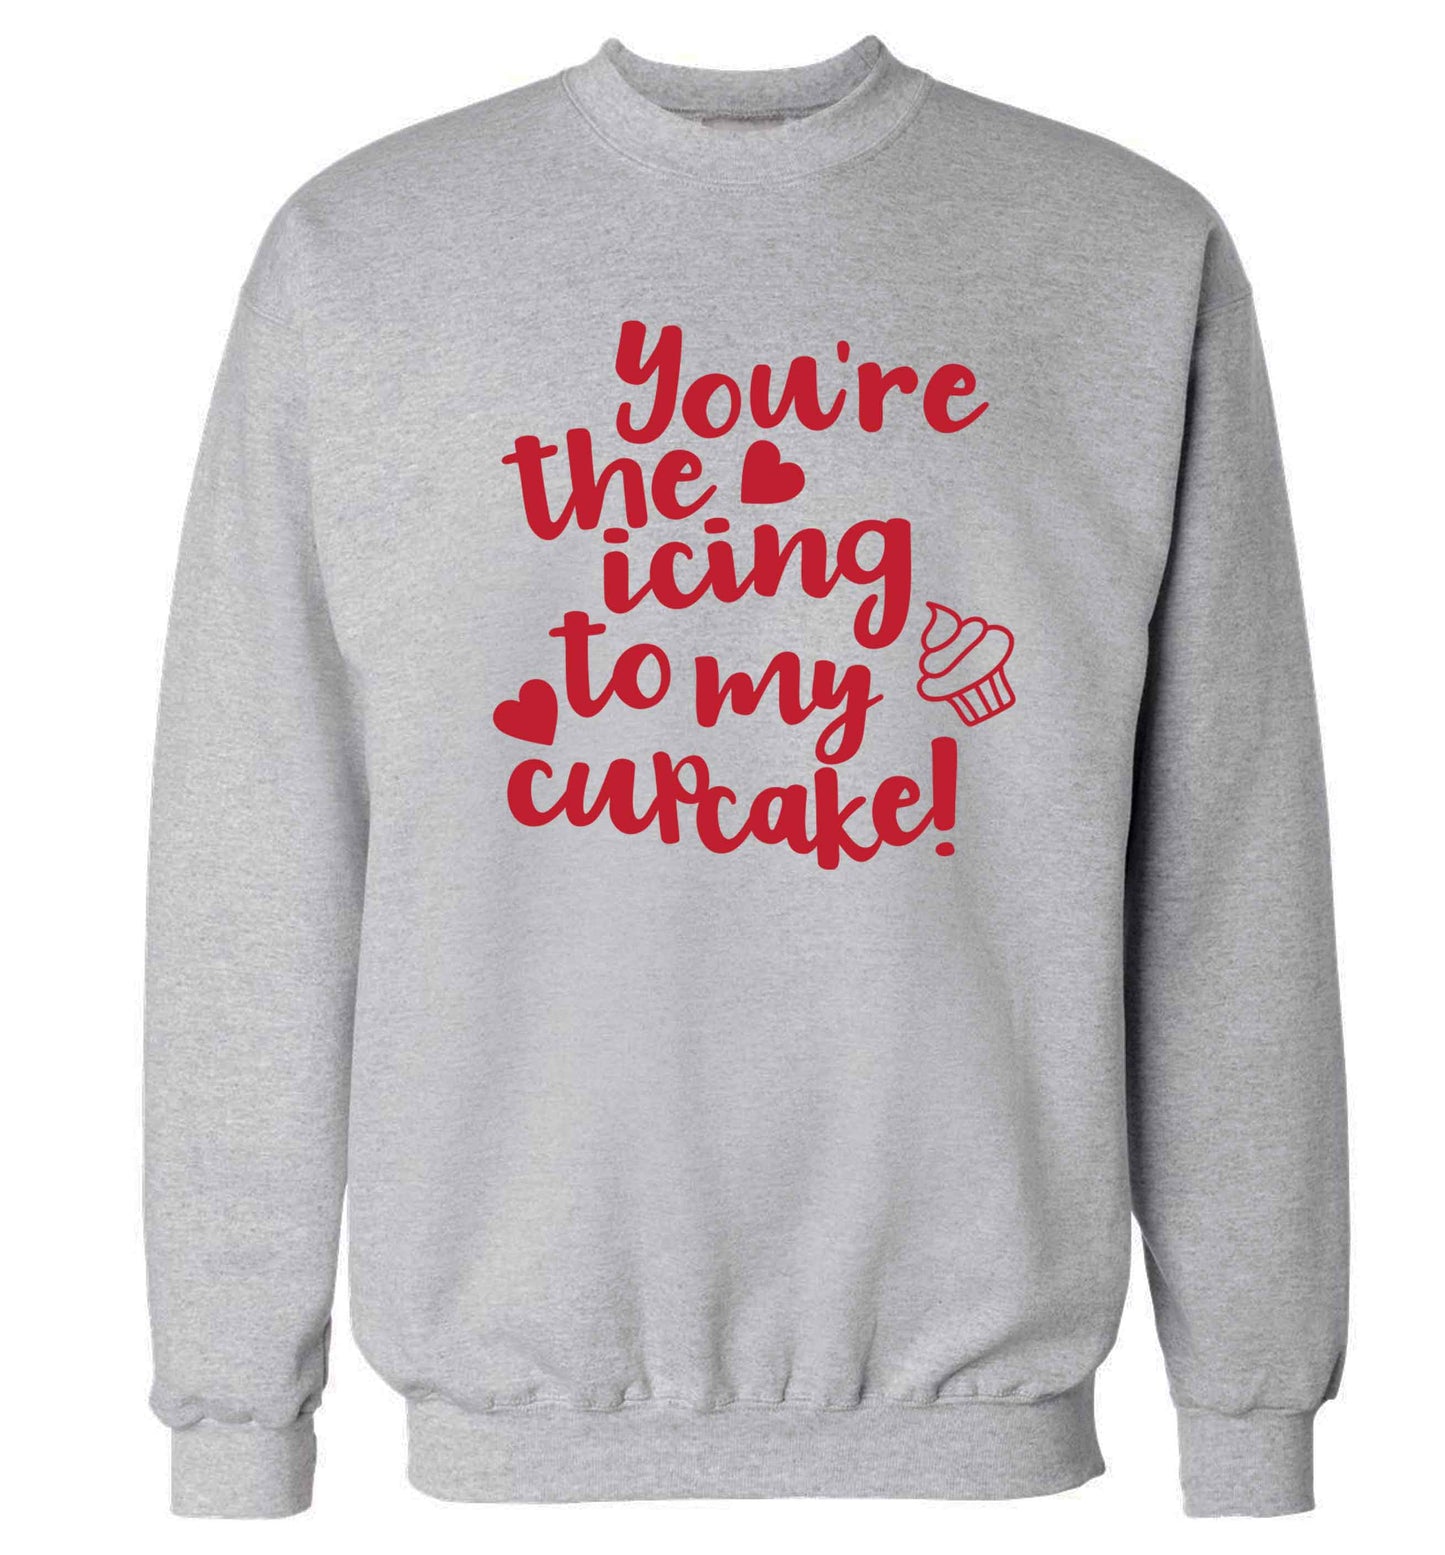 You're the icing to my cupcake Adult's unisex grey Sweater 2XL